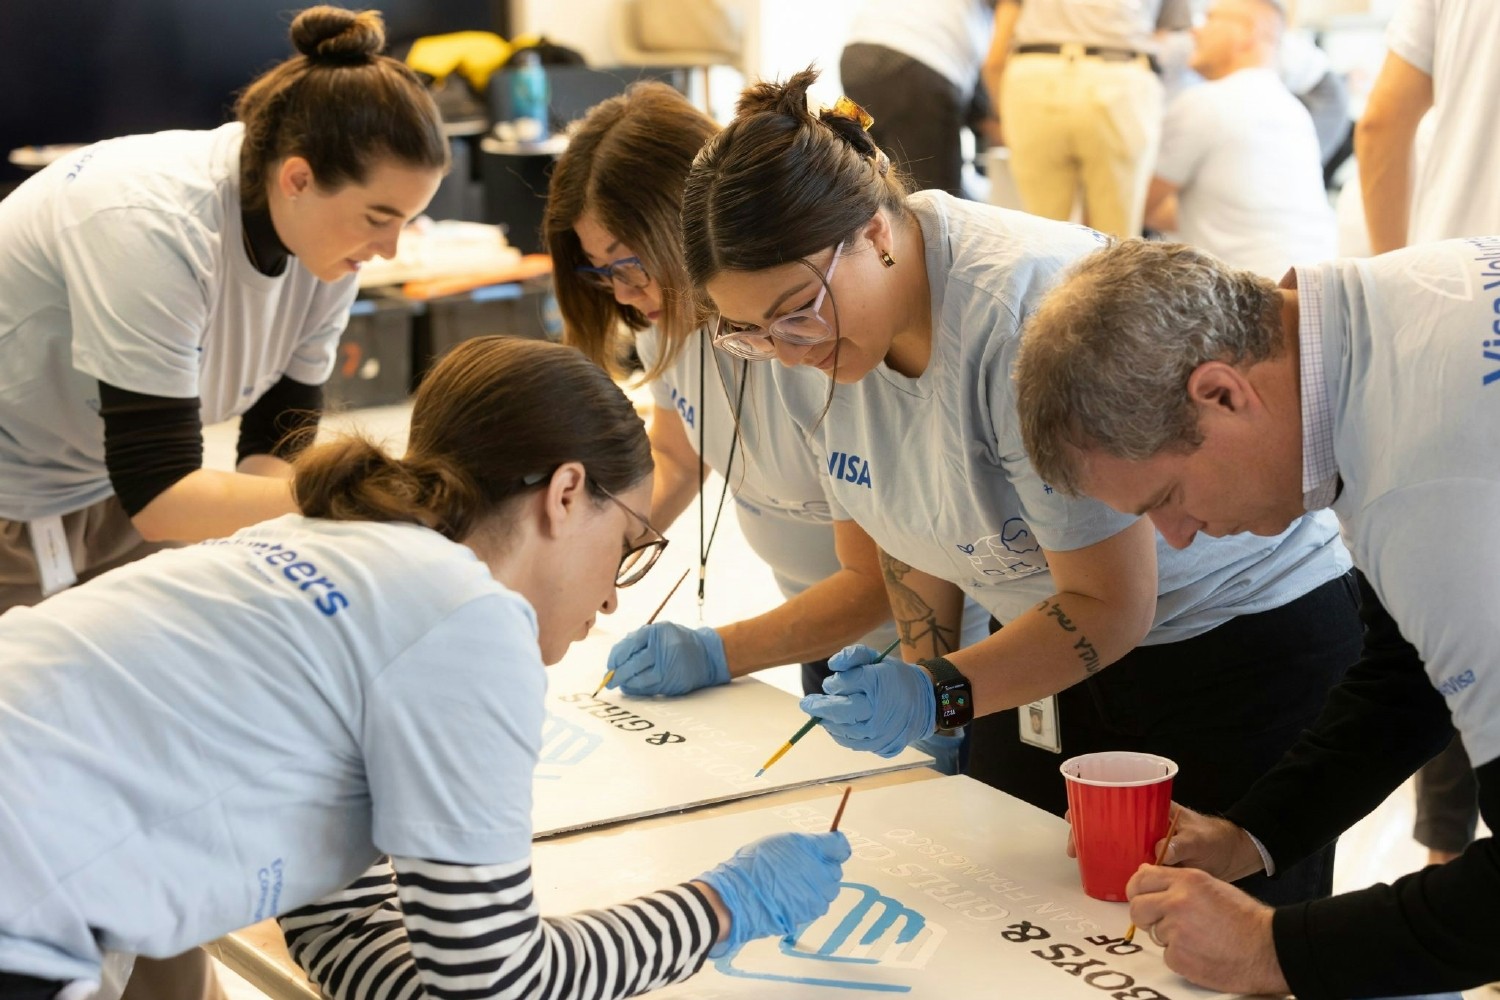 Visa employees across our North America offices came together this June for Global Volunteer Month. 